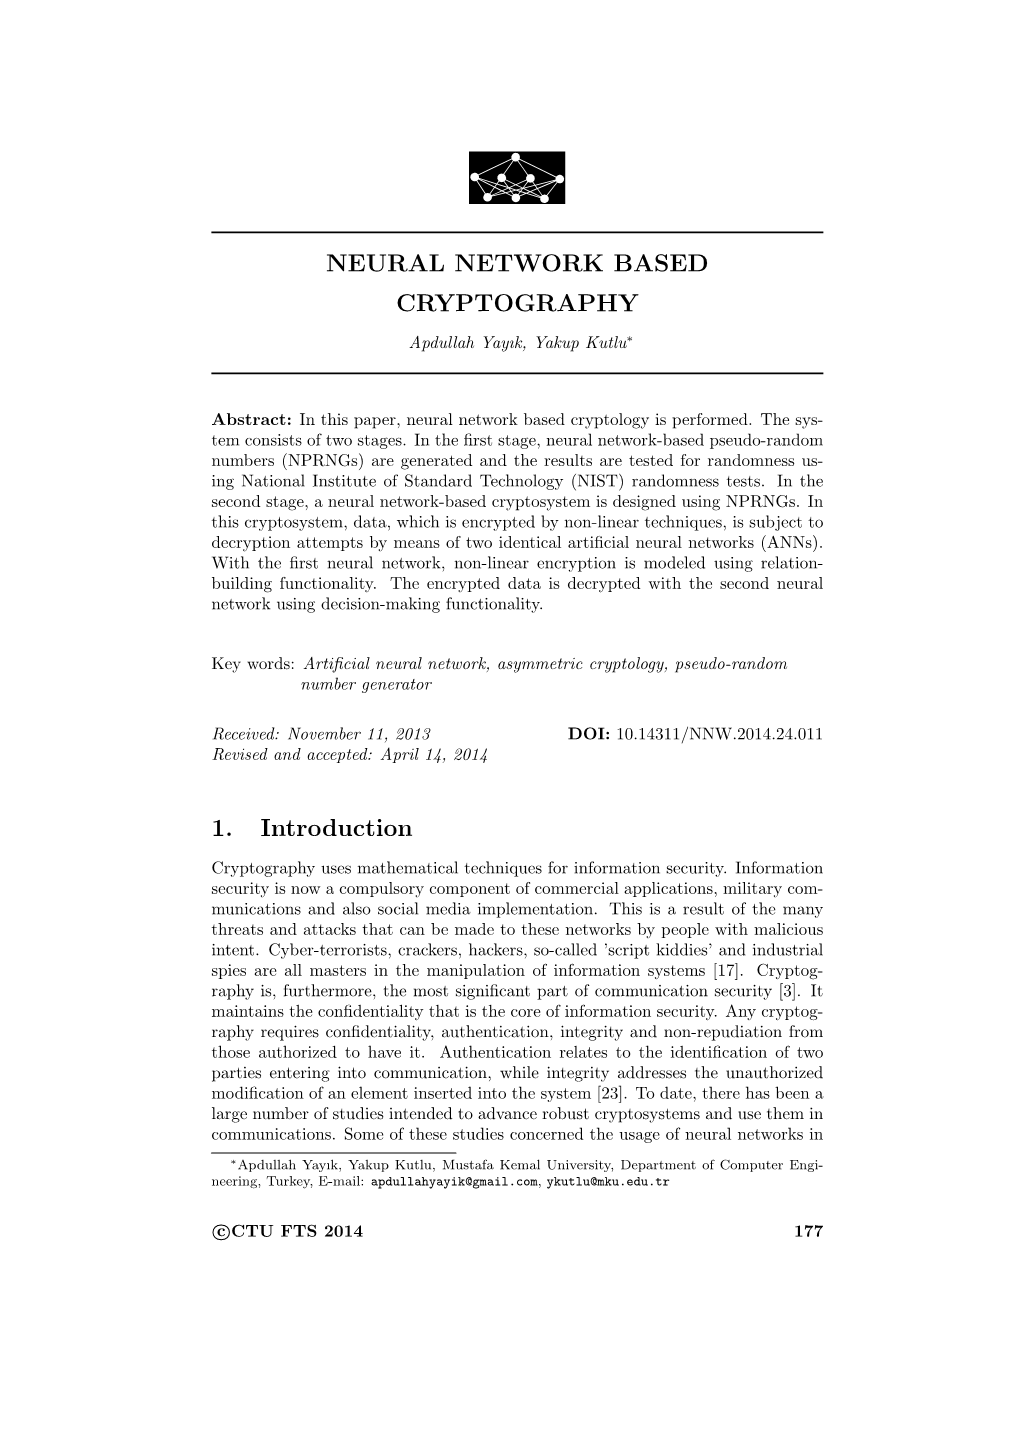 NEURAL NETWORK BASED CRYPTOGRAPHY 1. Introduction